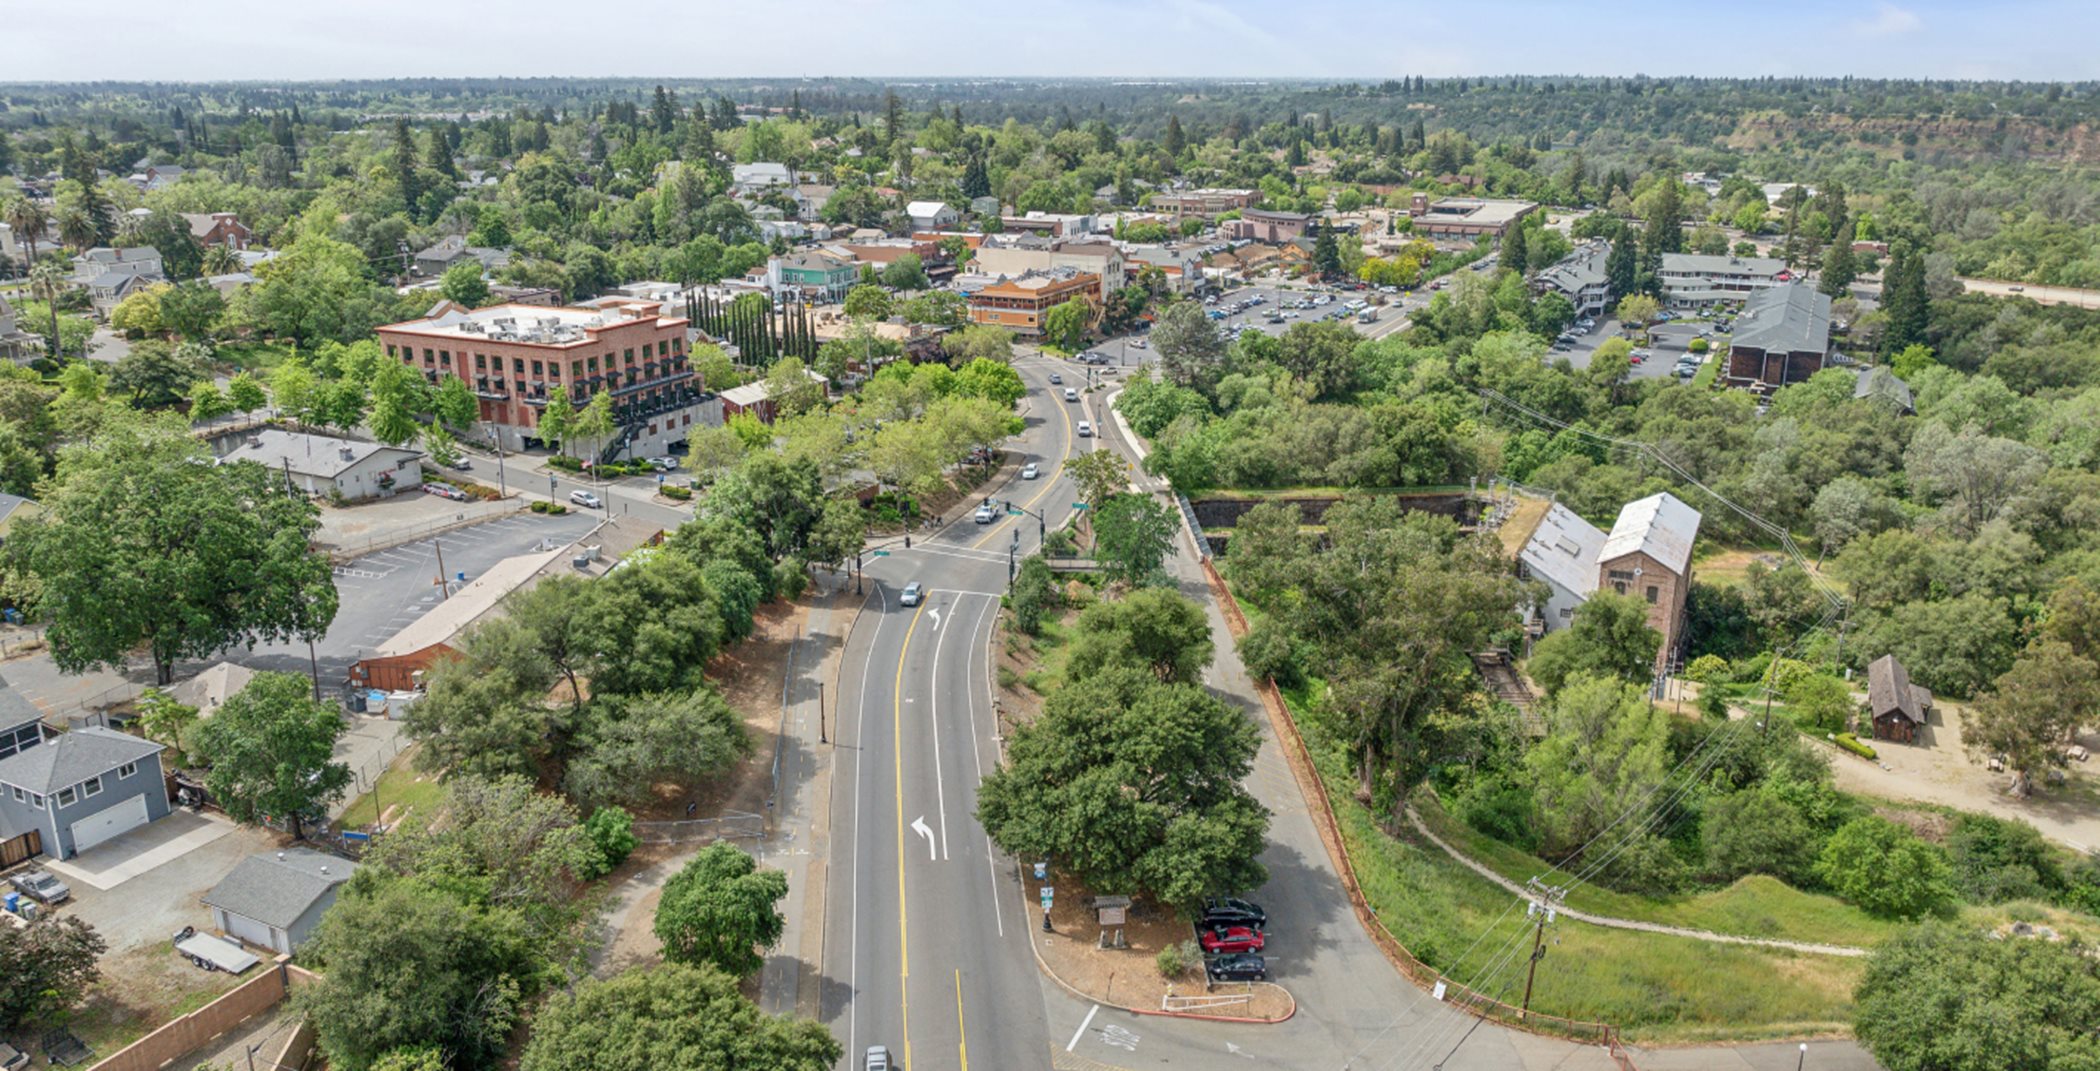 The Folsom Historic District aerial view